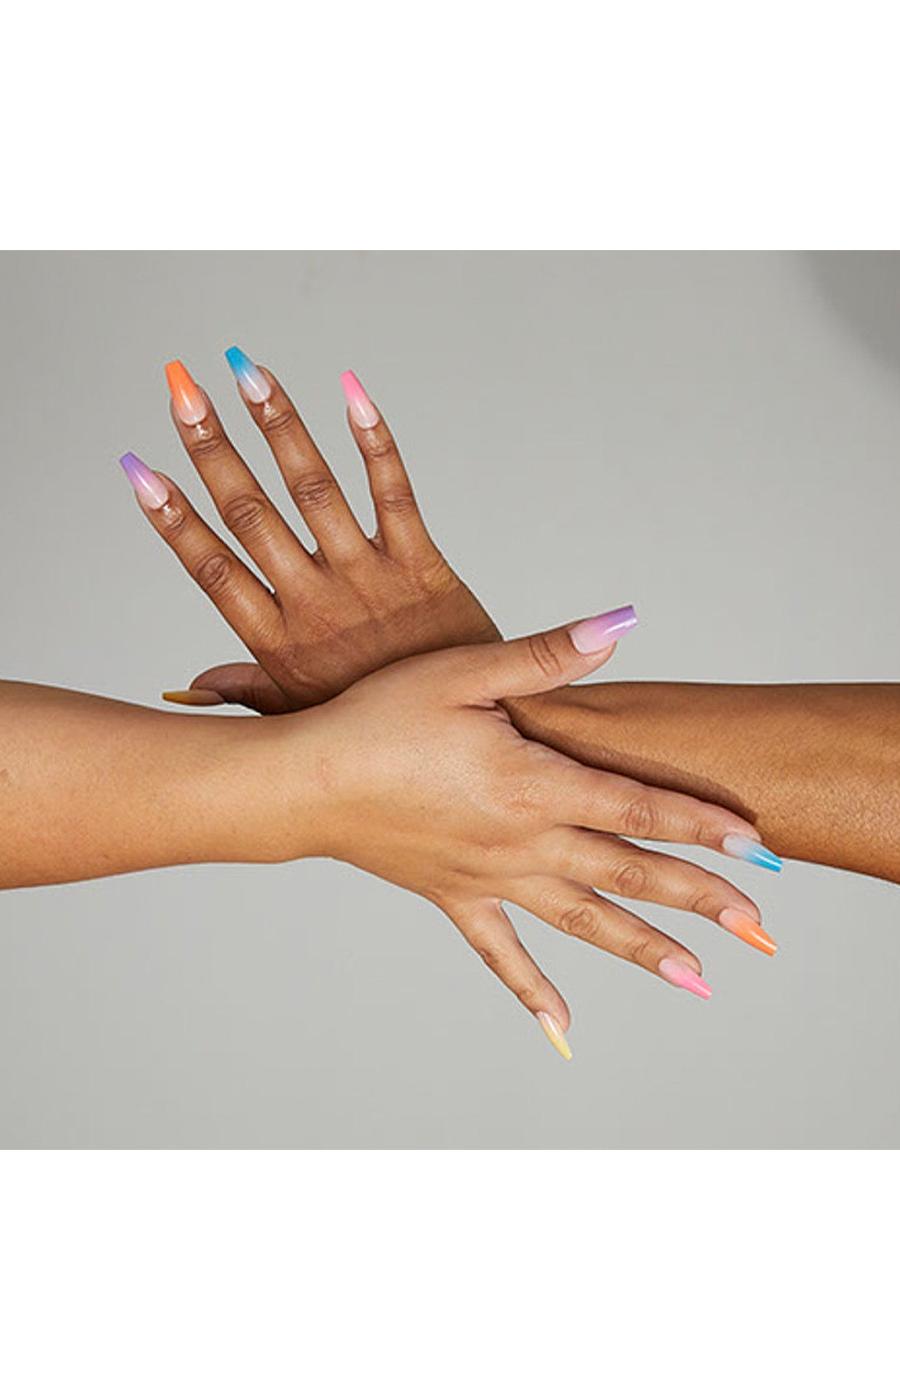 Diosa Devi's Bliss Artificial French Nails - Multicolor Neon; image 3 of 4